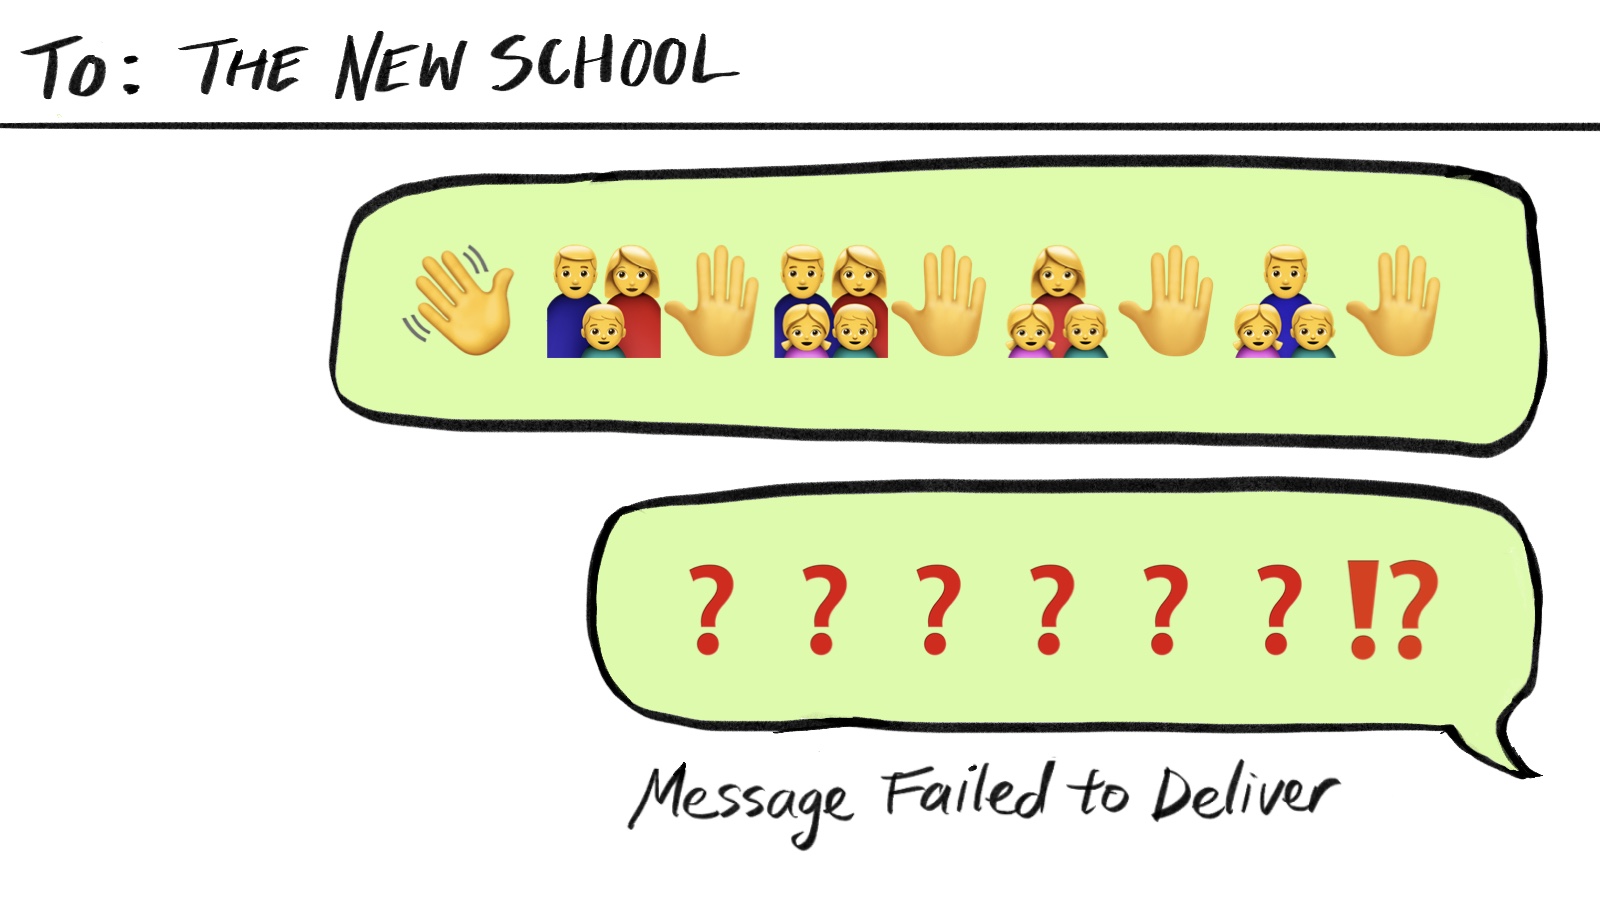 Illustration of text messages directed “To: The New School” First message contains hand and family emojis. The second message contains question marks. The error message says “Message Failed to Deliver.”